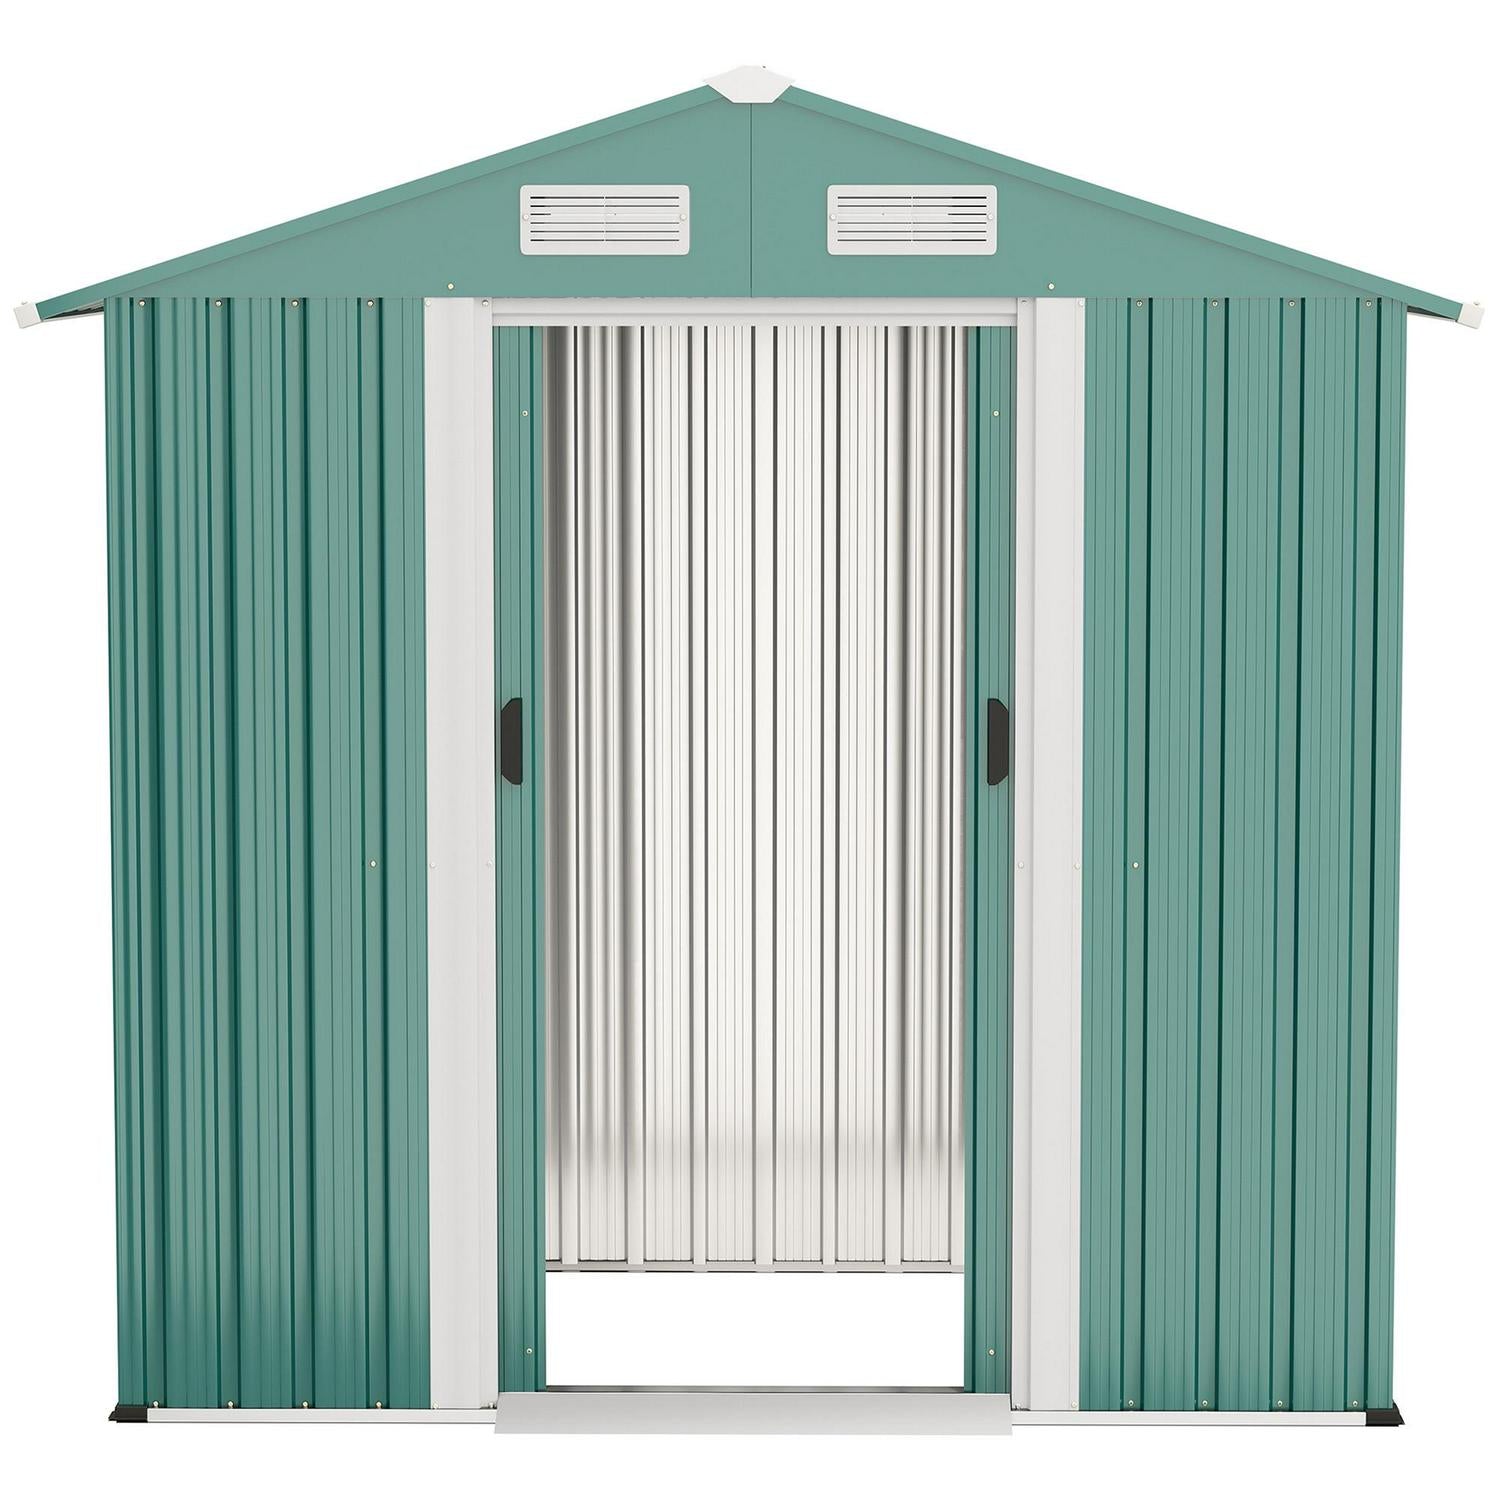 Garden Metal Storage Shed W/ Double Sliding Door And Air Vents, Tool For Backyard Patio Lawn, Green 6ft X 3.7ft